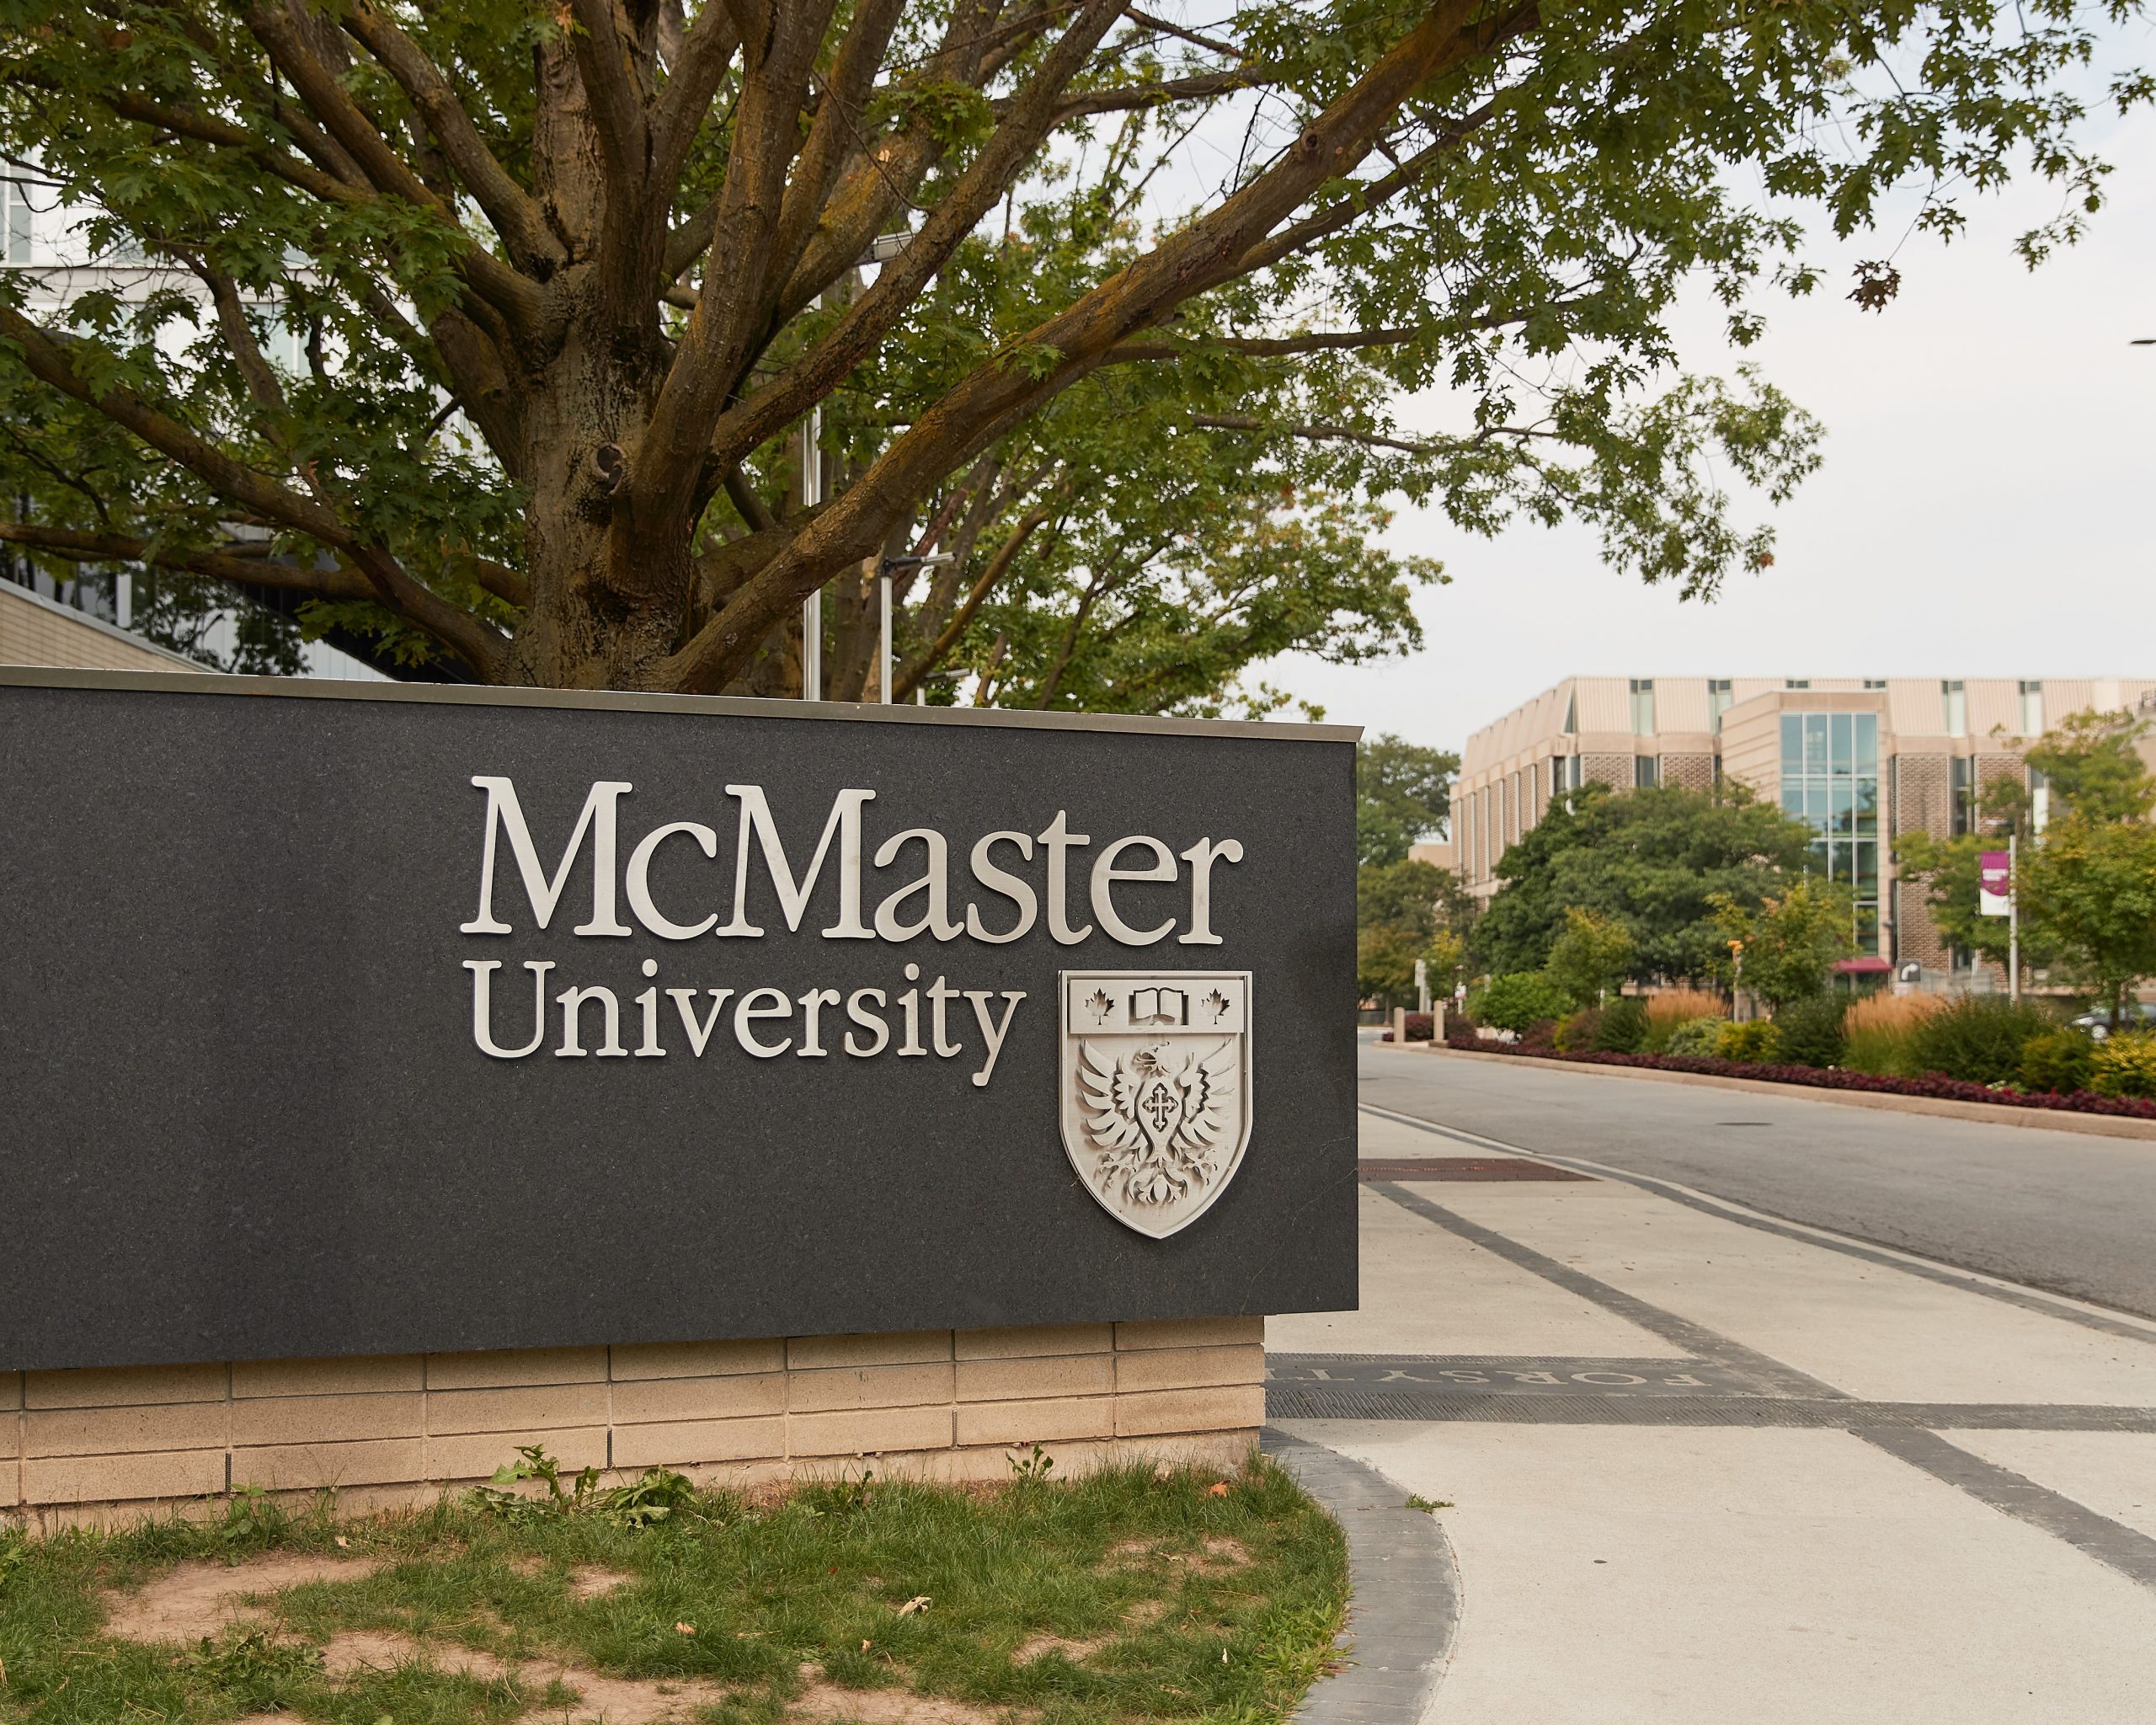 A picture of the McMaster University sign on campus.